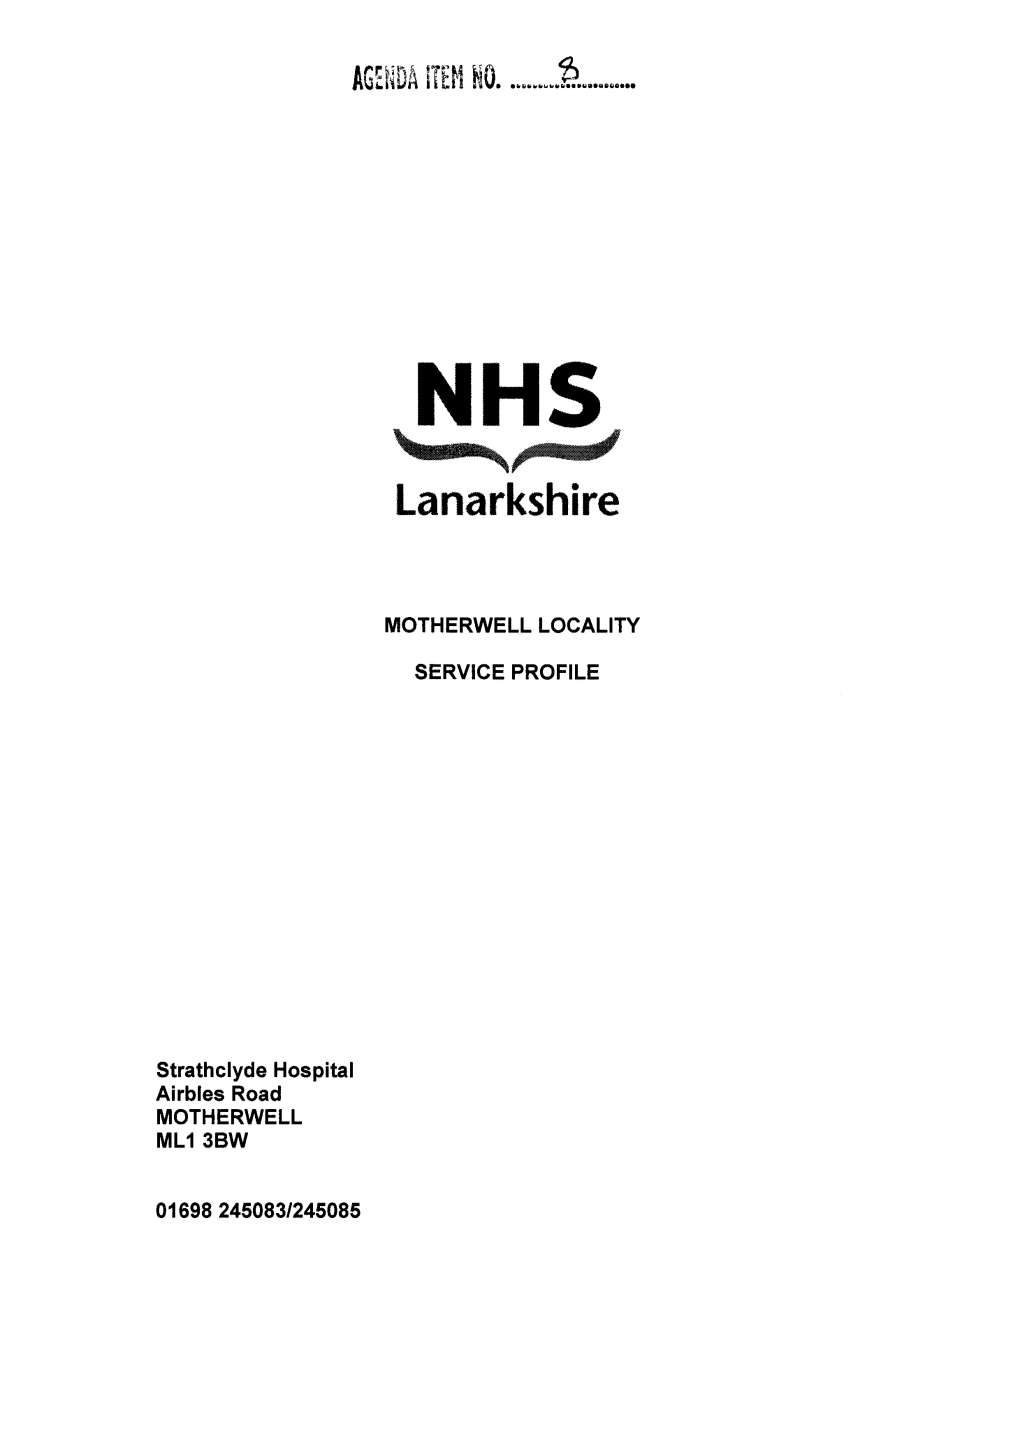 NHS Lanarkshire Motherwell Locality Service Profile